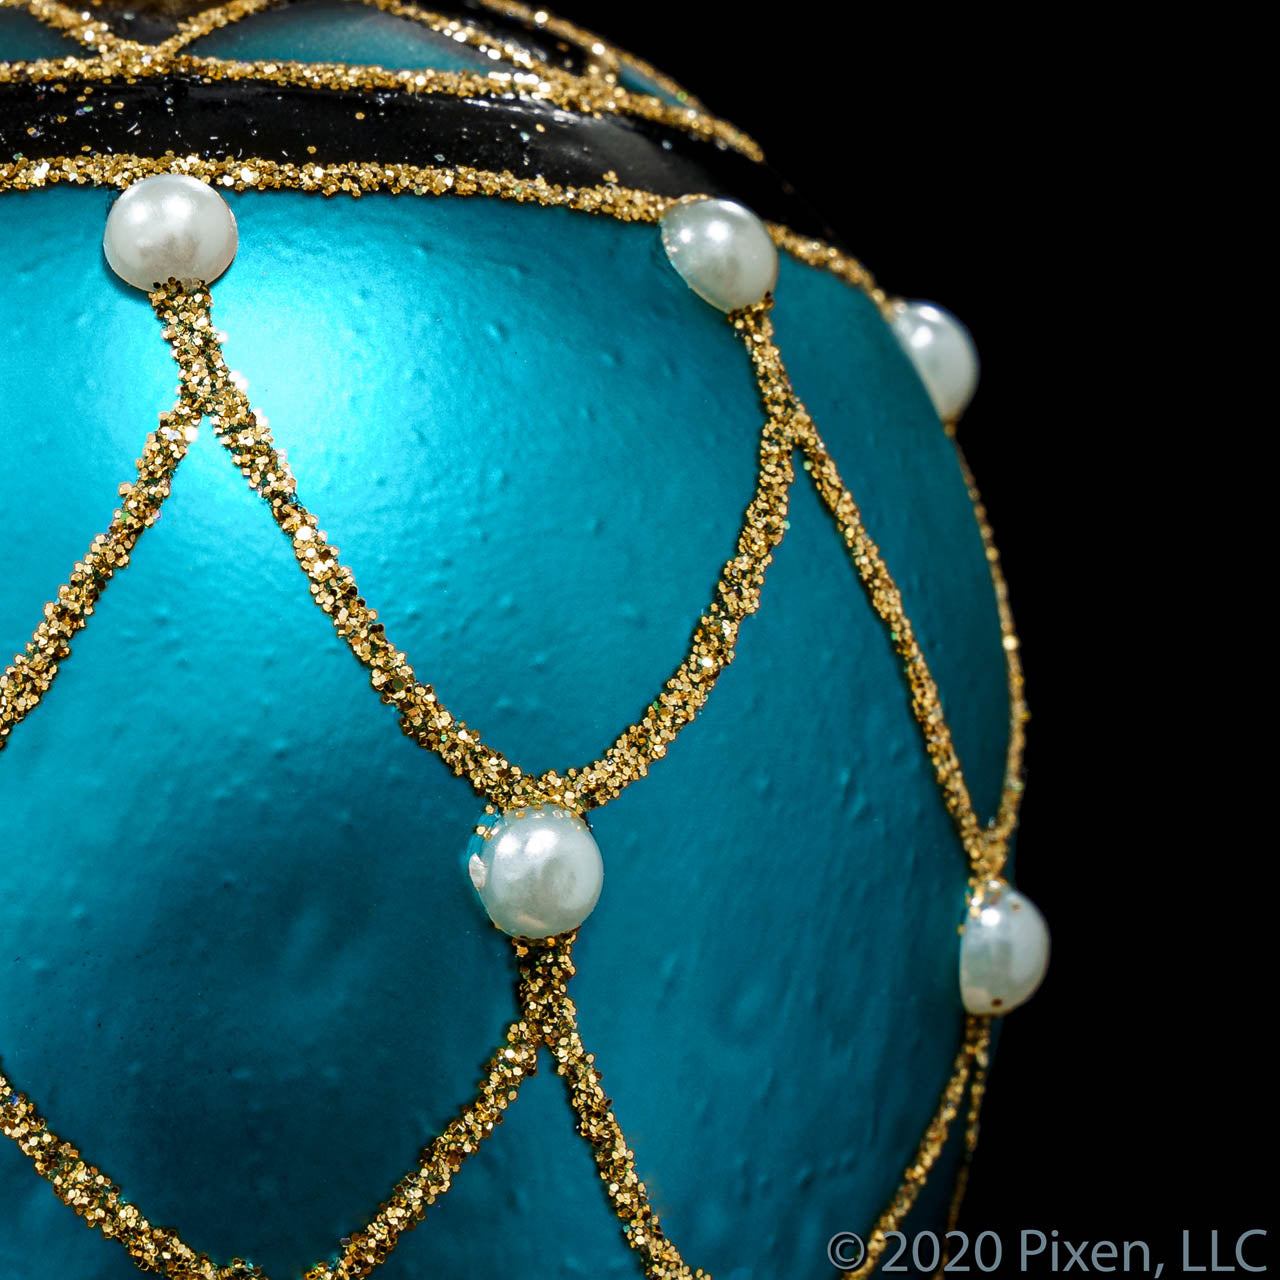 Reverie Mini Glass Christmas Ornament in Turquoise